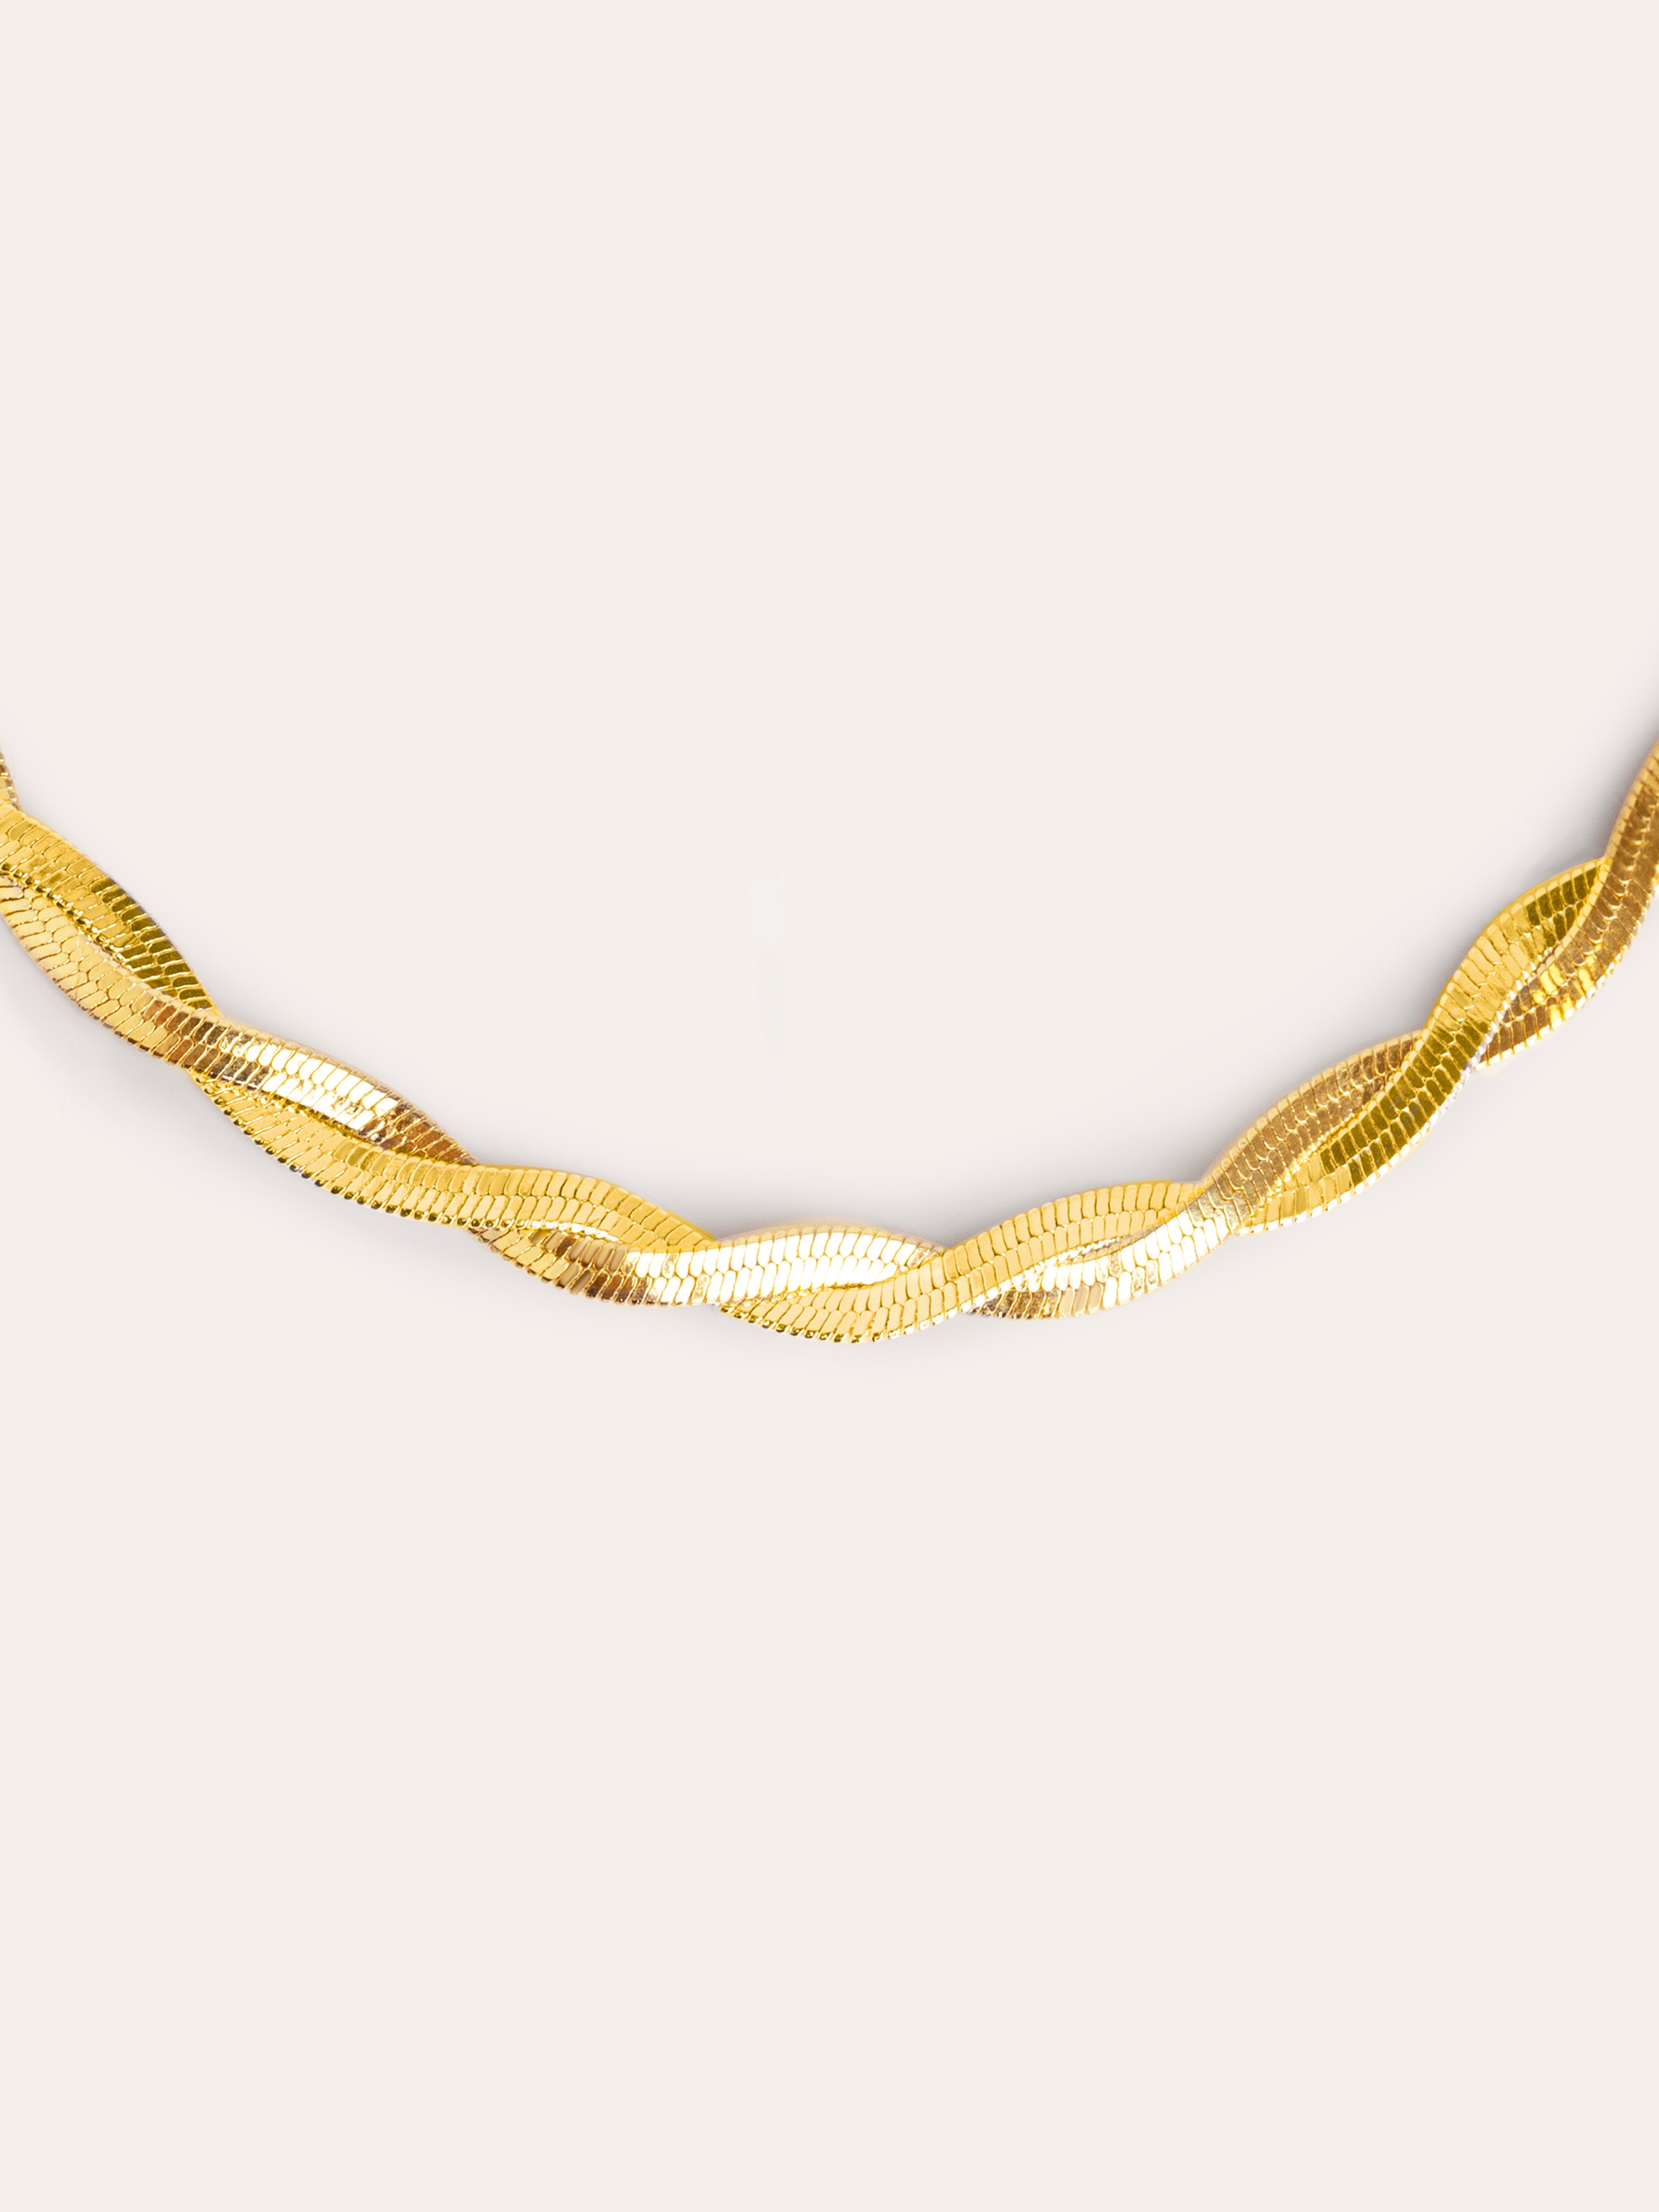 Lisse Twister Stainless Steel Gold Necklace